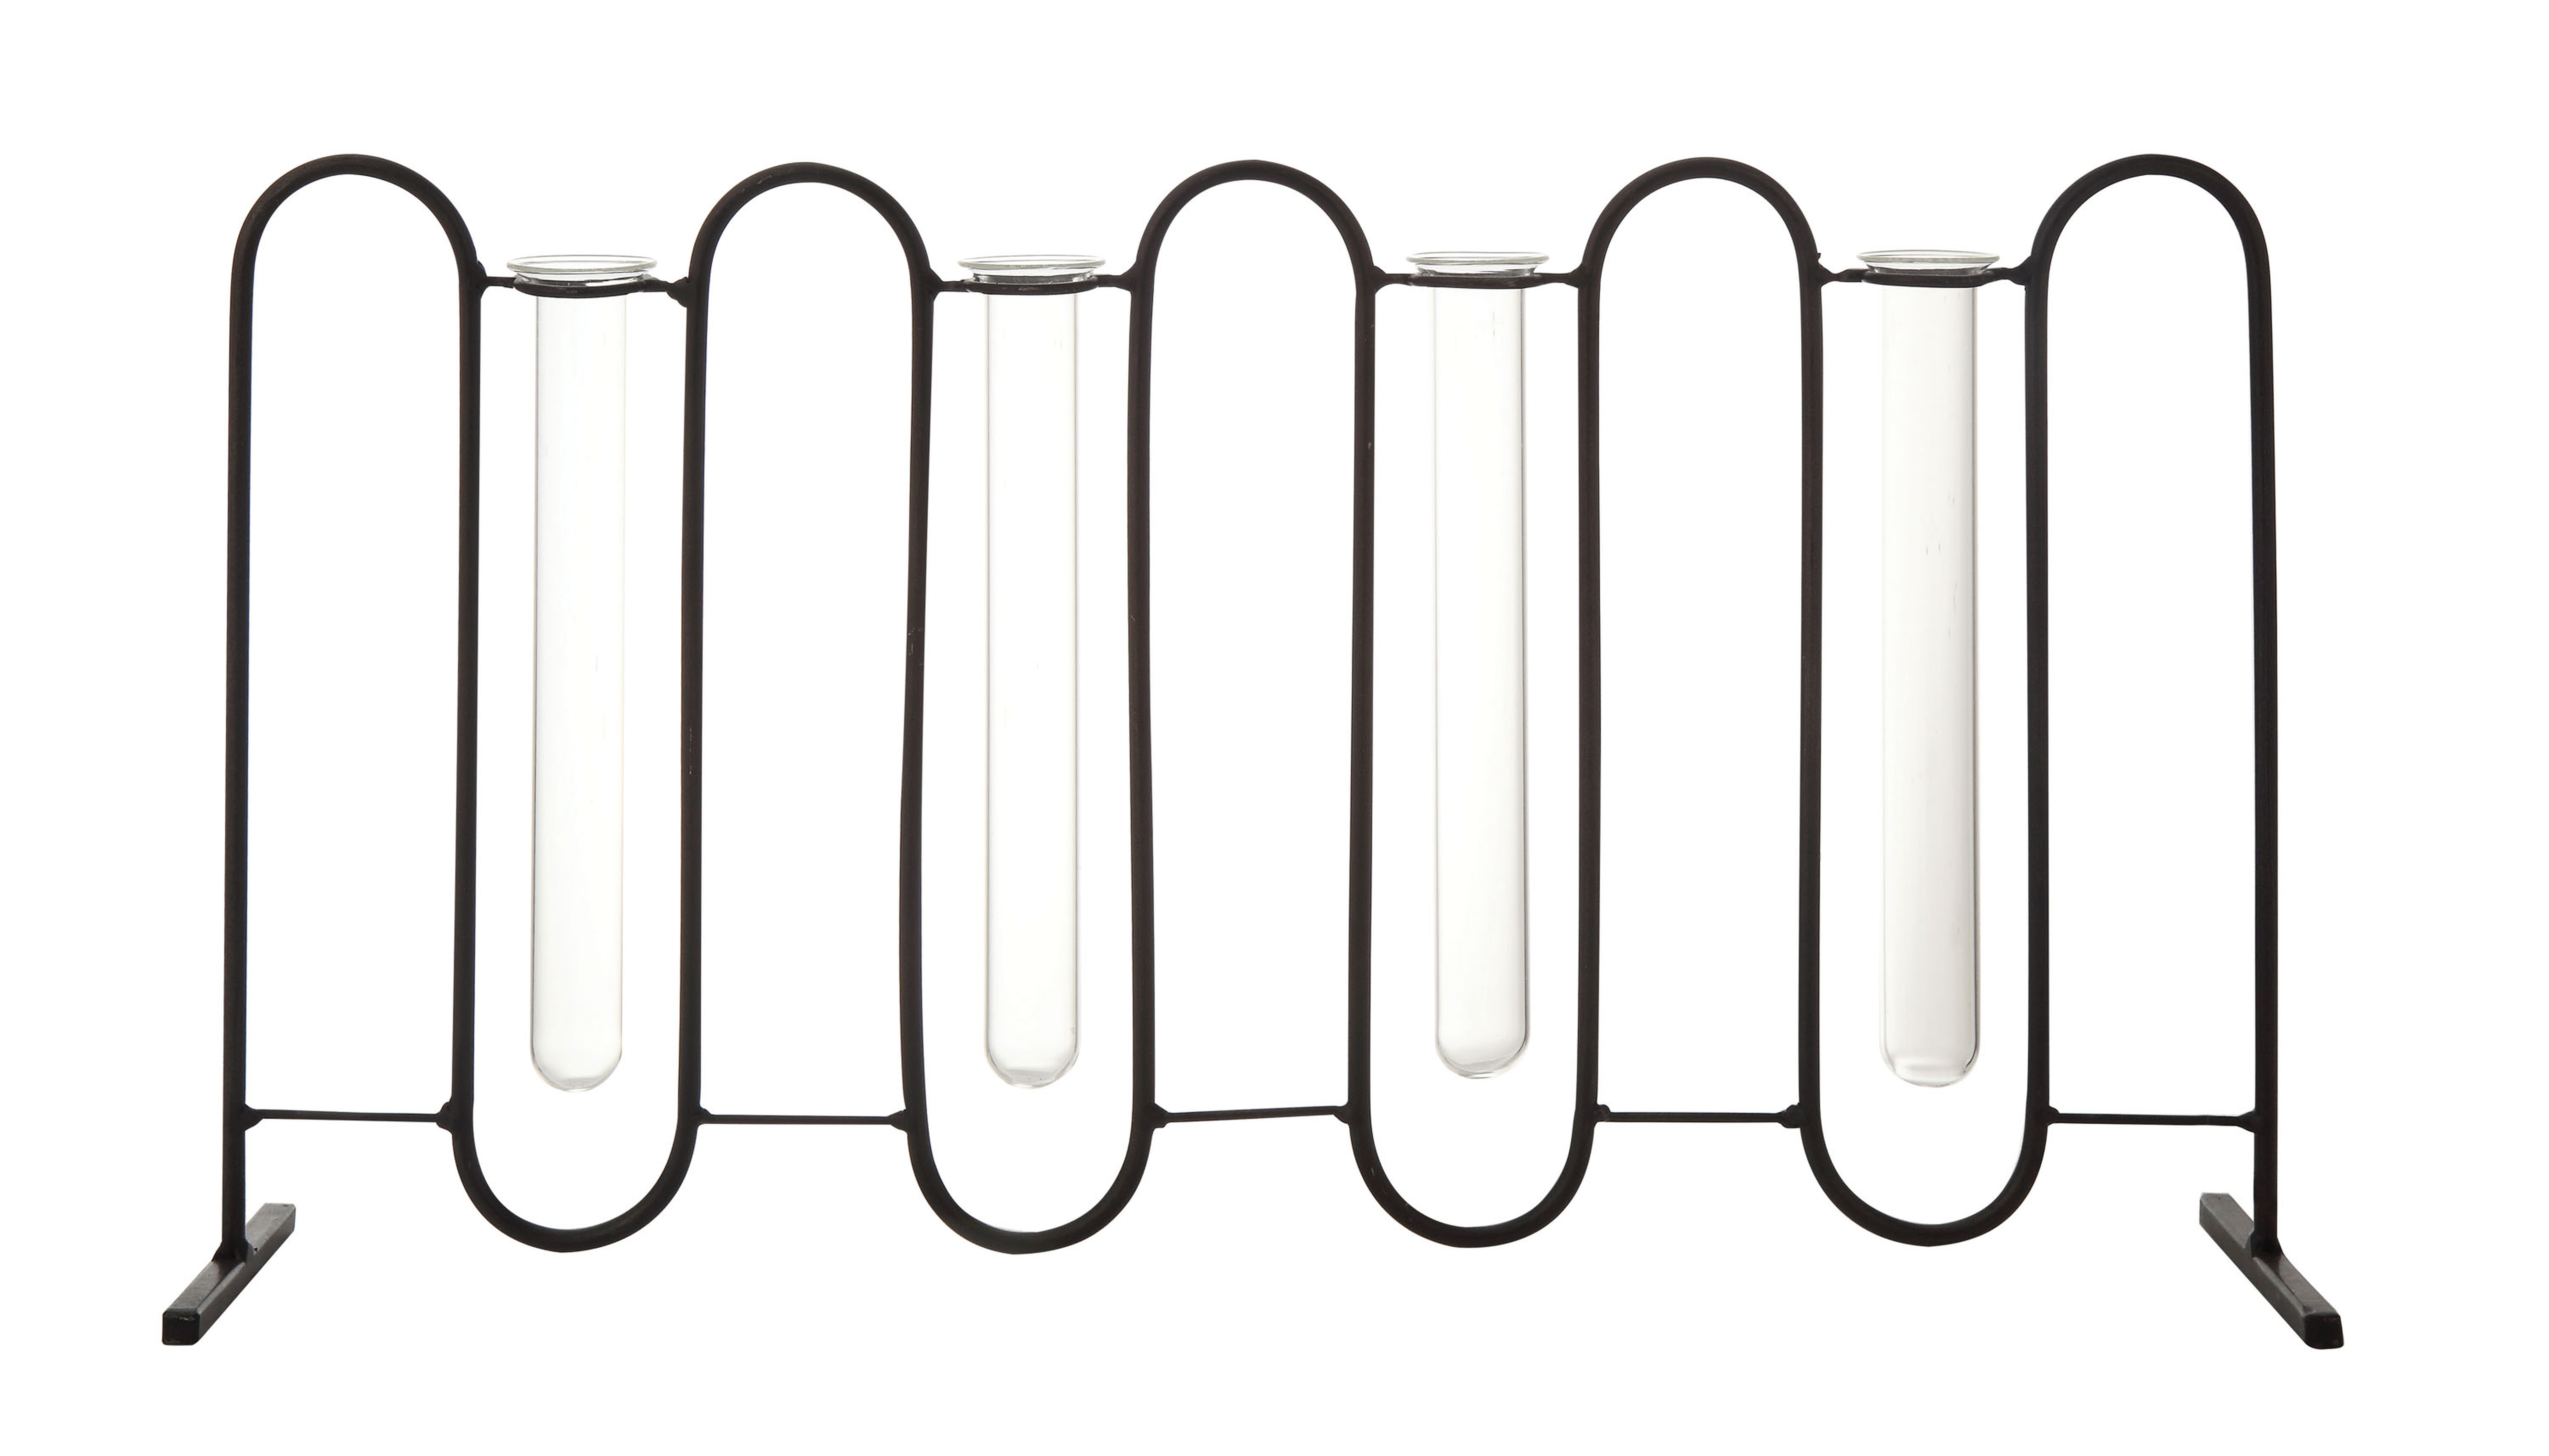 Four Test Tube Bud Vases in Metal Stand (Set of 5 Pieces) - Moss & Wilder